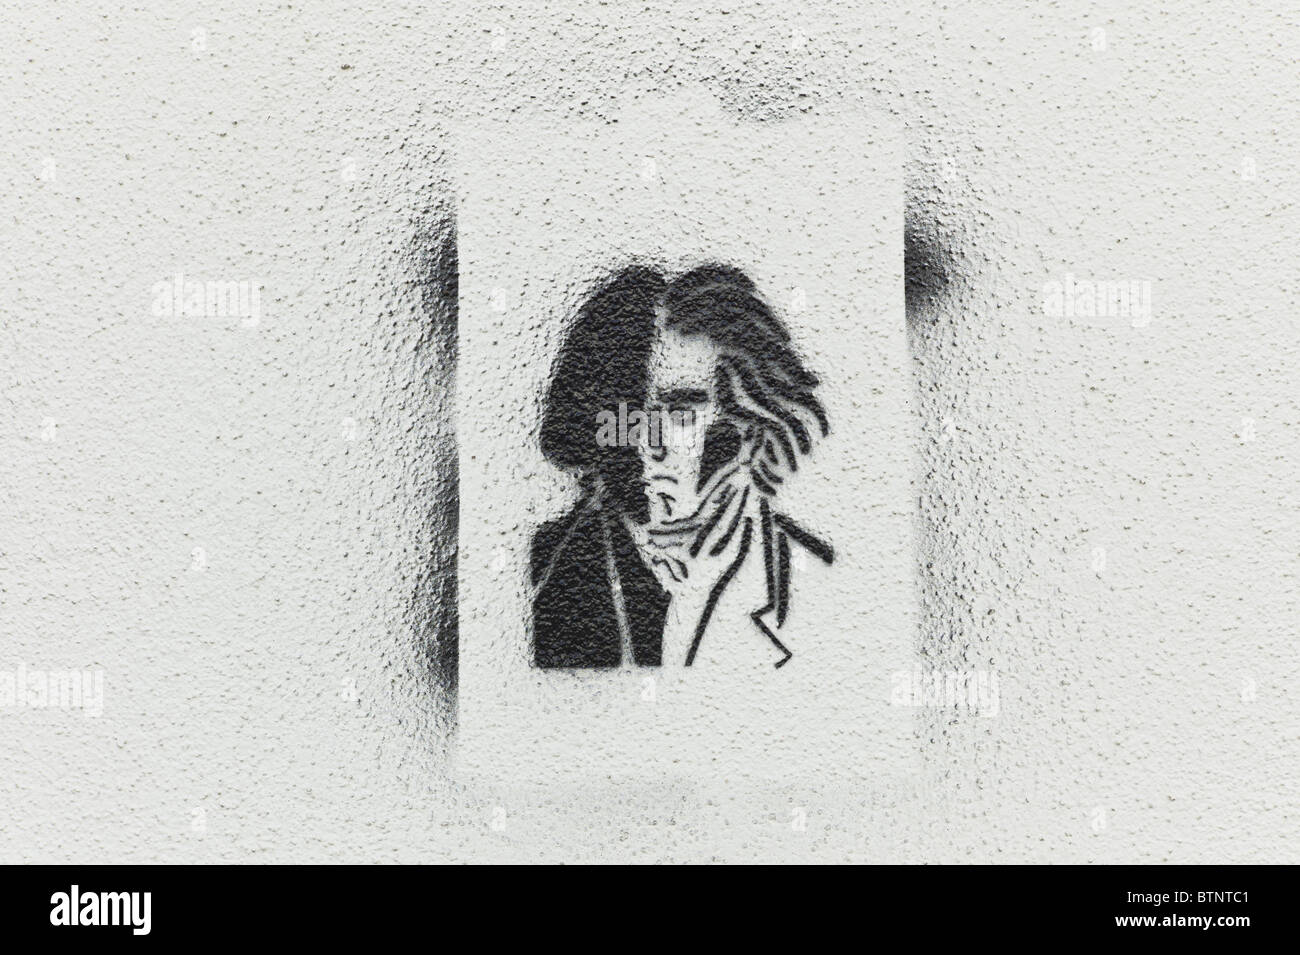 Stencil / Graffiti showing a portrait of Beethoven on a bright wall in Schwabing, Munich Stock Photo